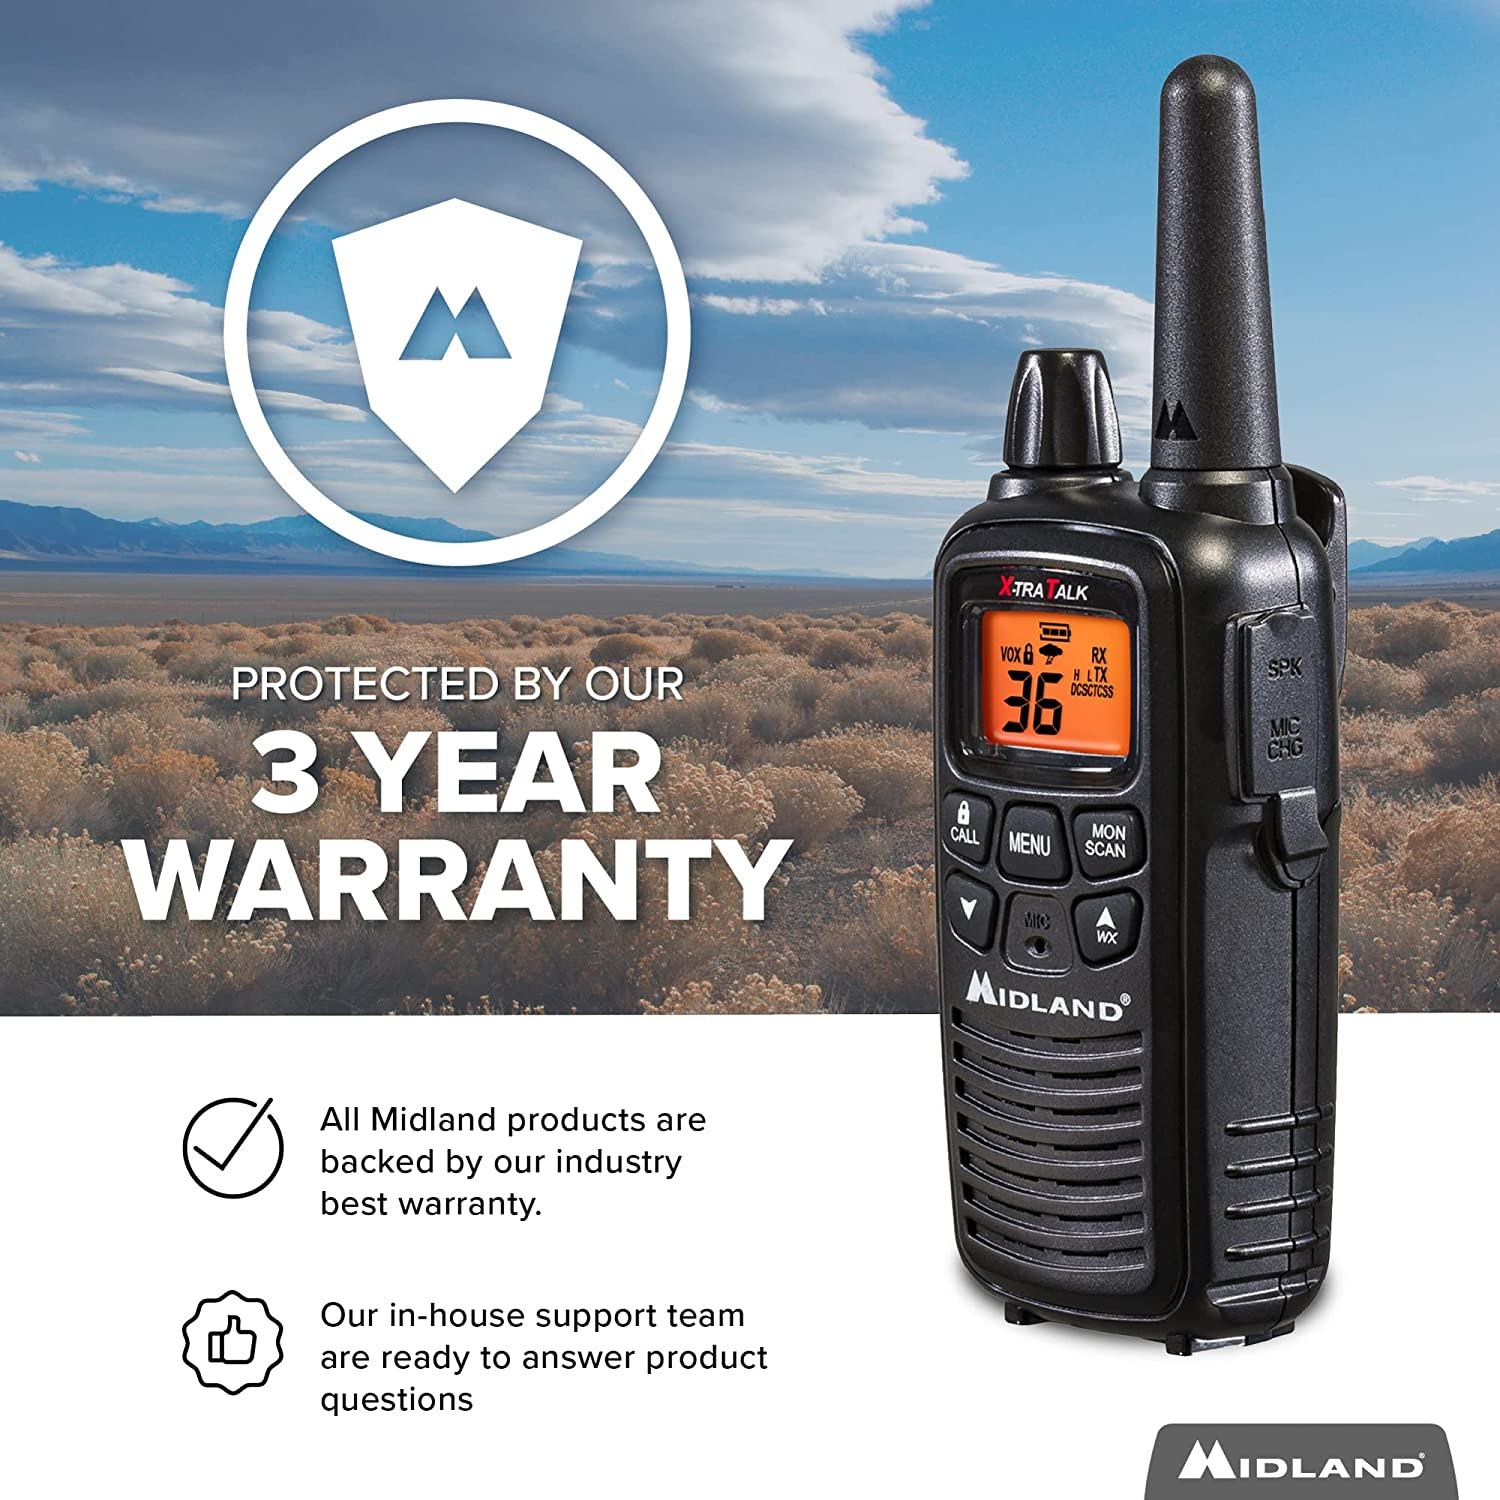 Midland LXT600VP3 36-Channel Walkie Talkies with Weather Alert and